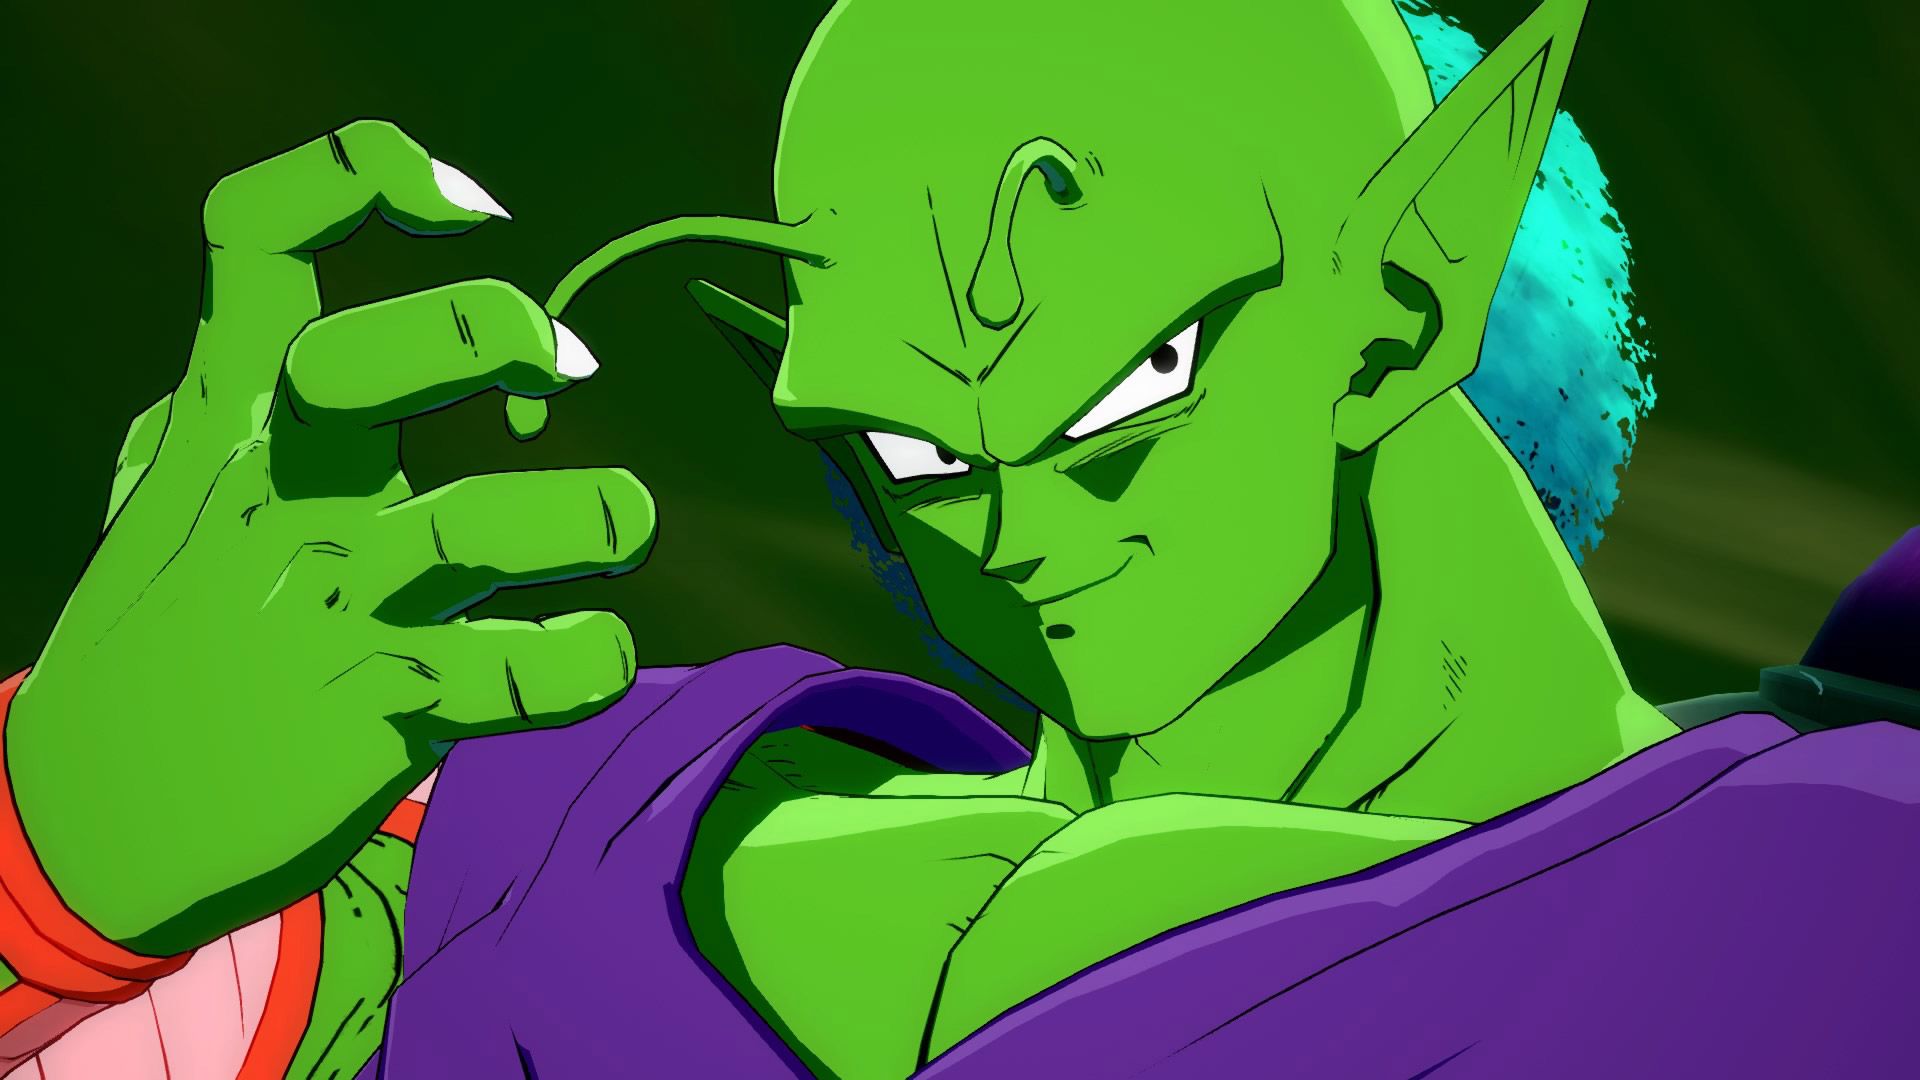 Dragon Ball Z Every Fighter Ranked Weakest To Strongest